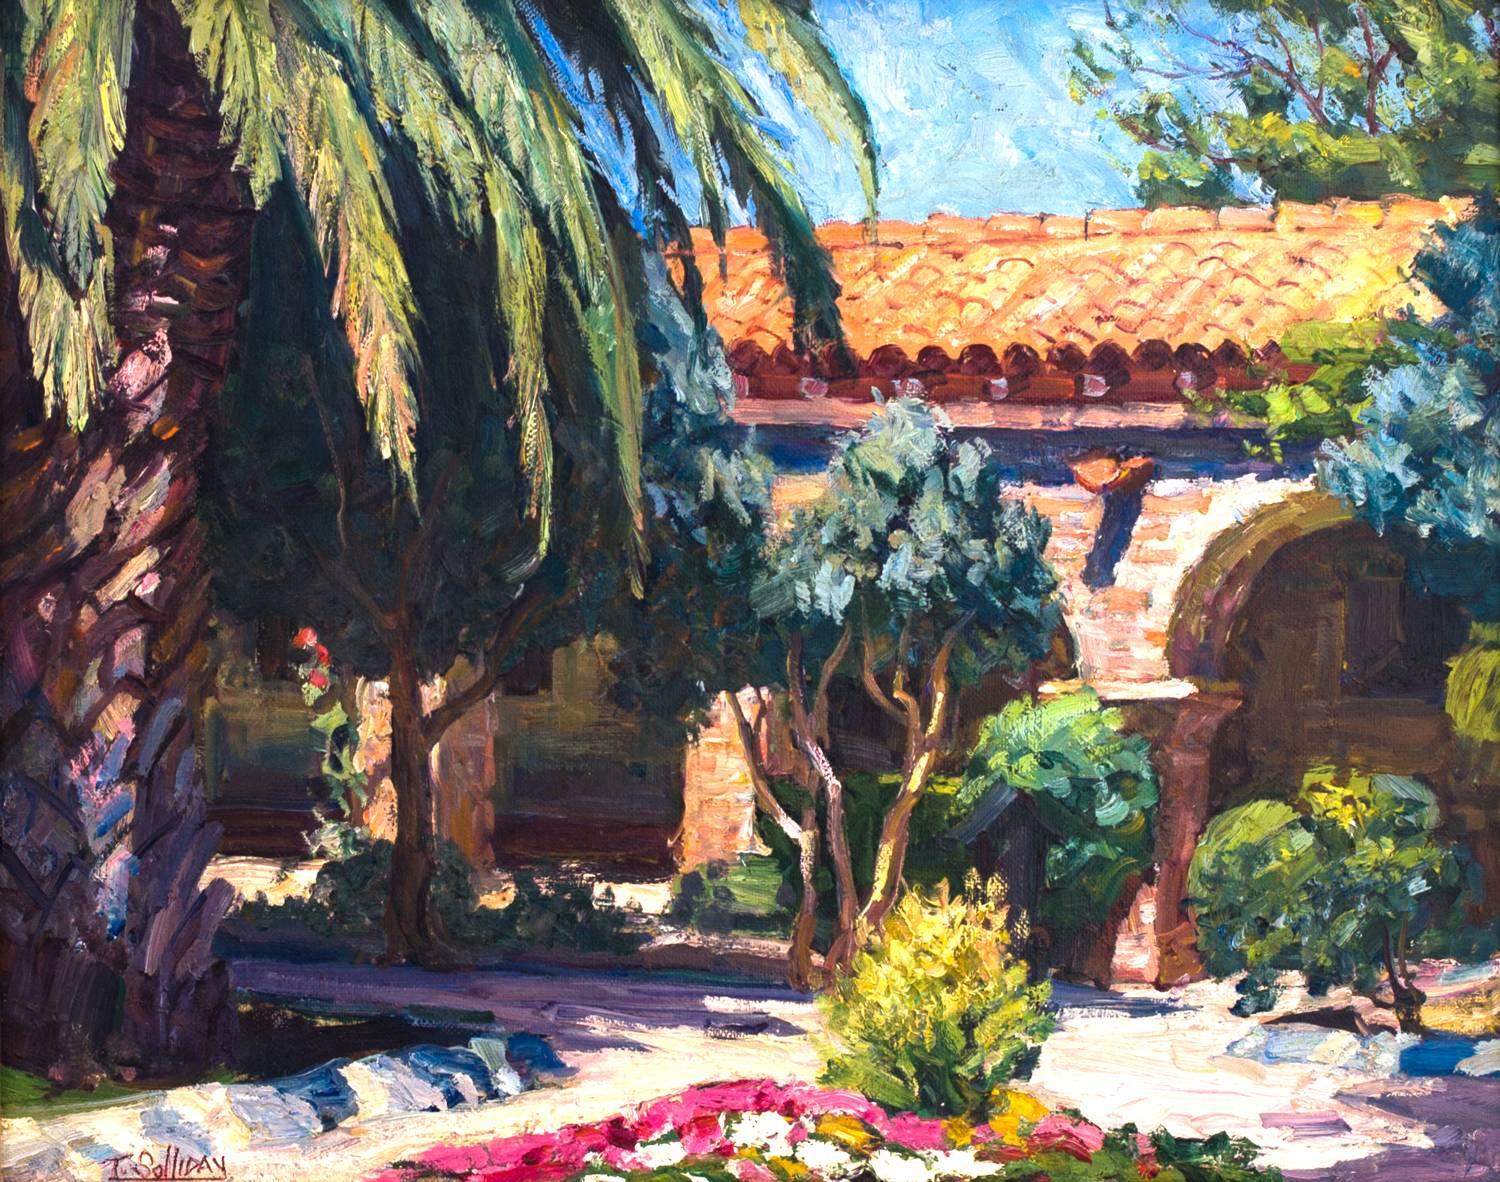 Mission San Juan Capistrano - Painting by Tim Solliday